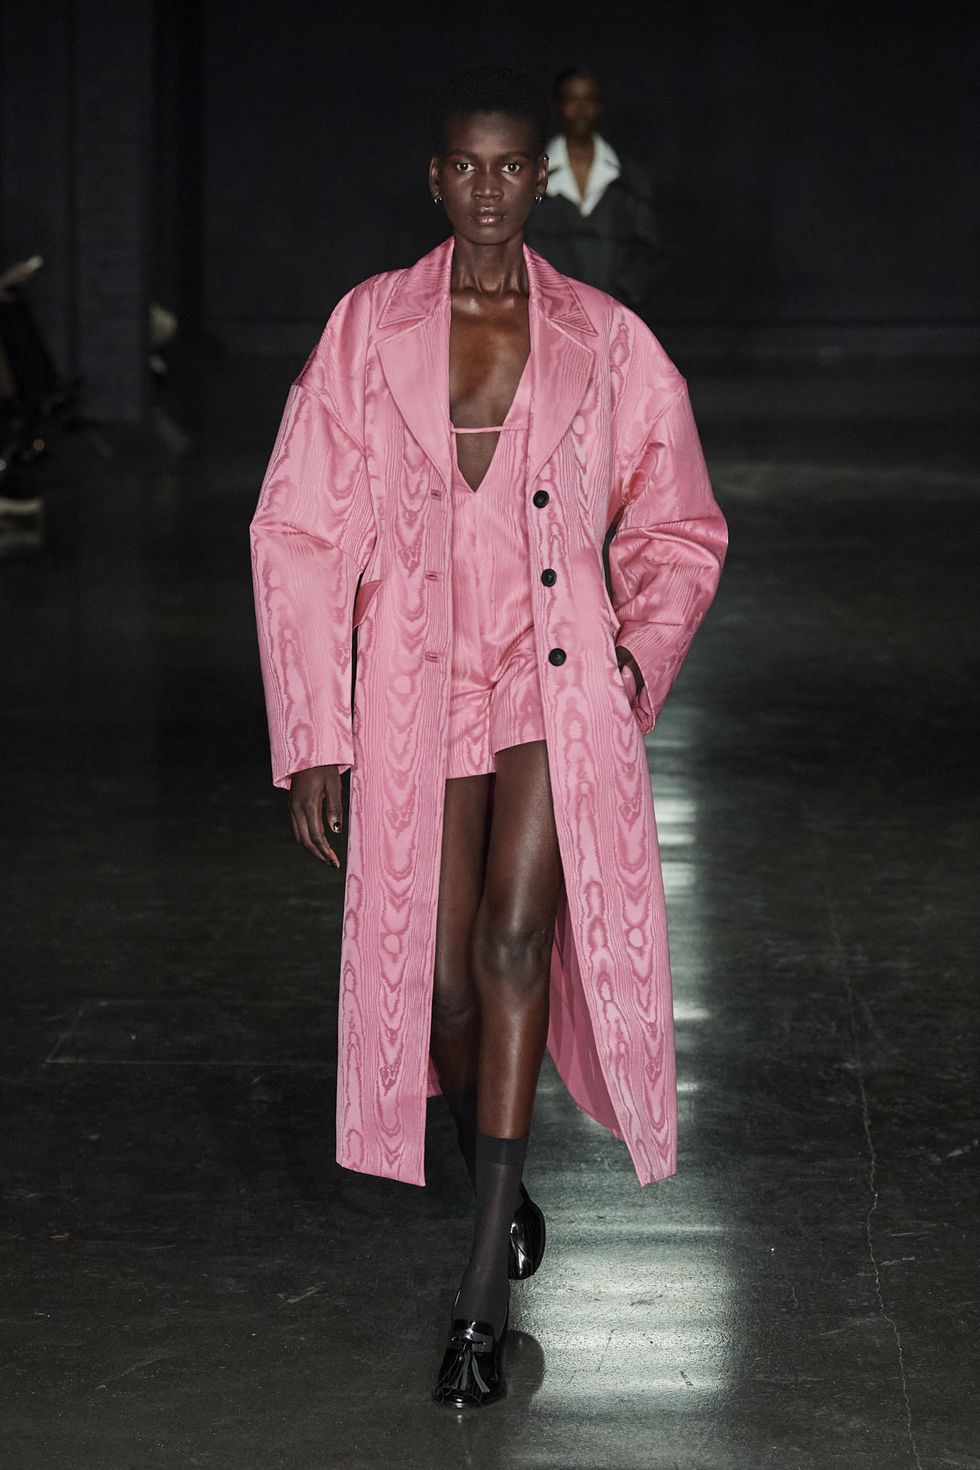 a model wearing a pink suit